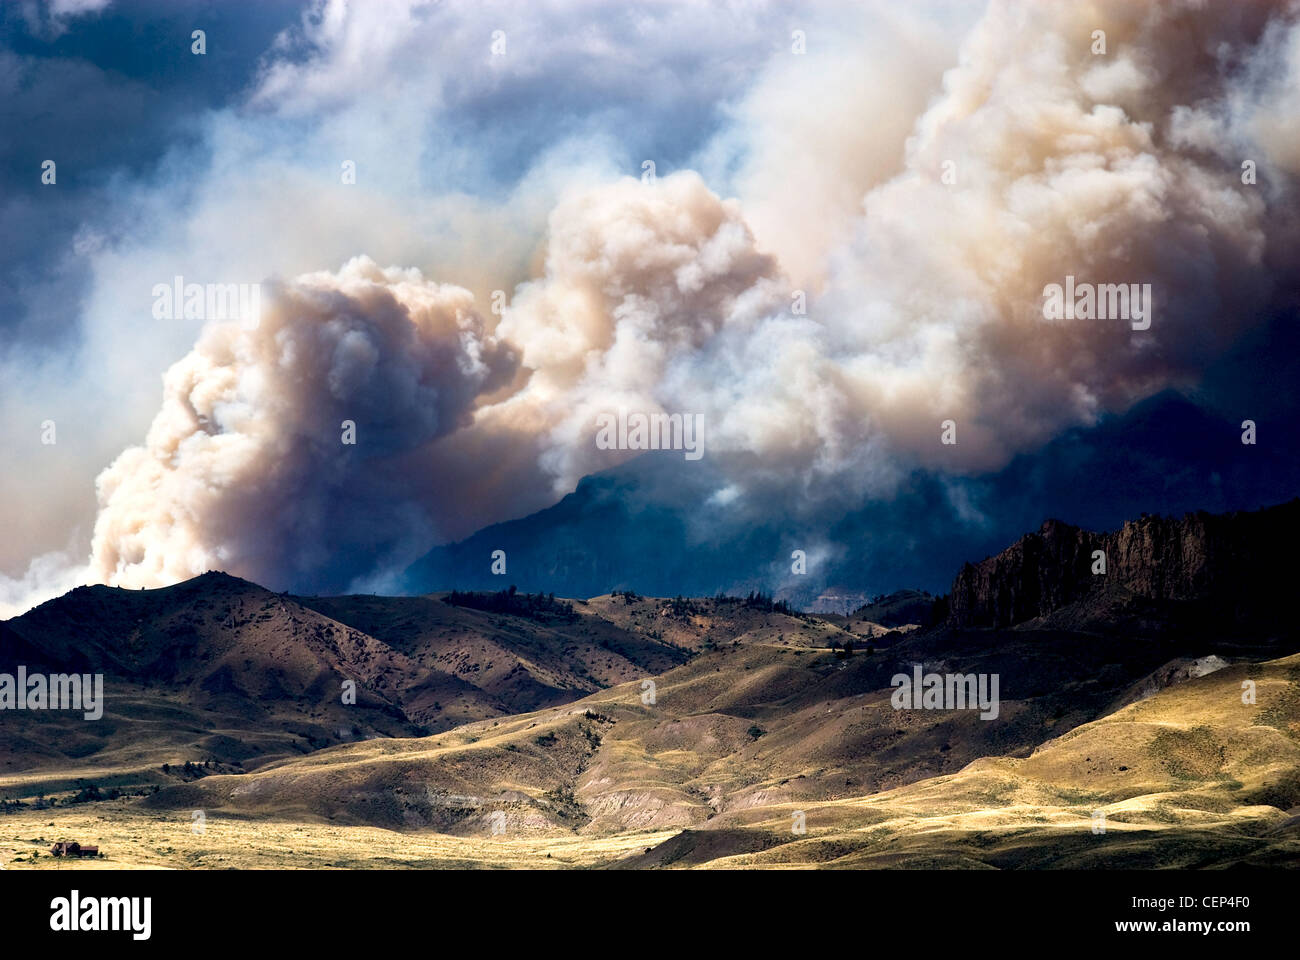 Forest fire, Cody, Wyoming Stock Photo